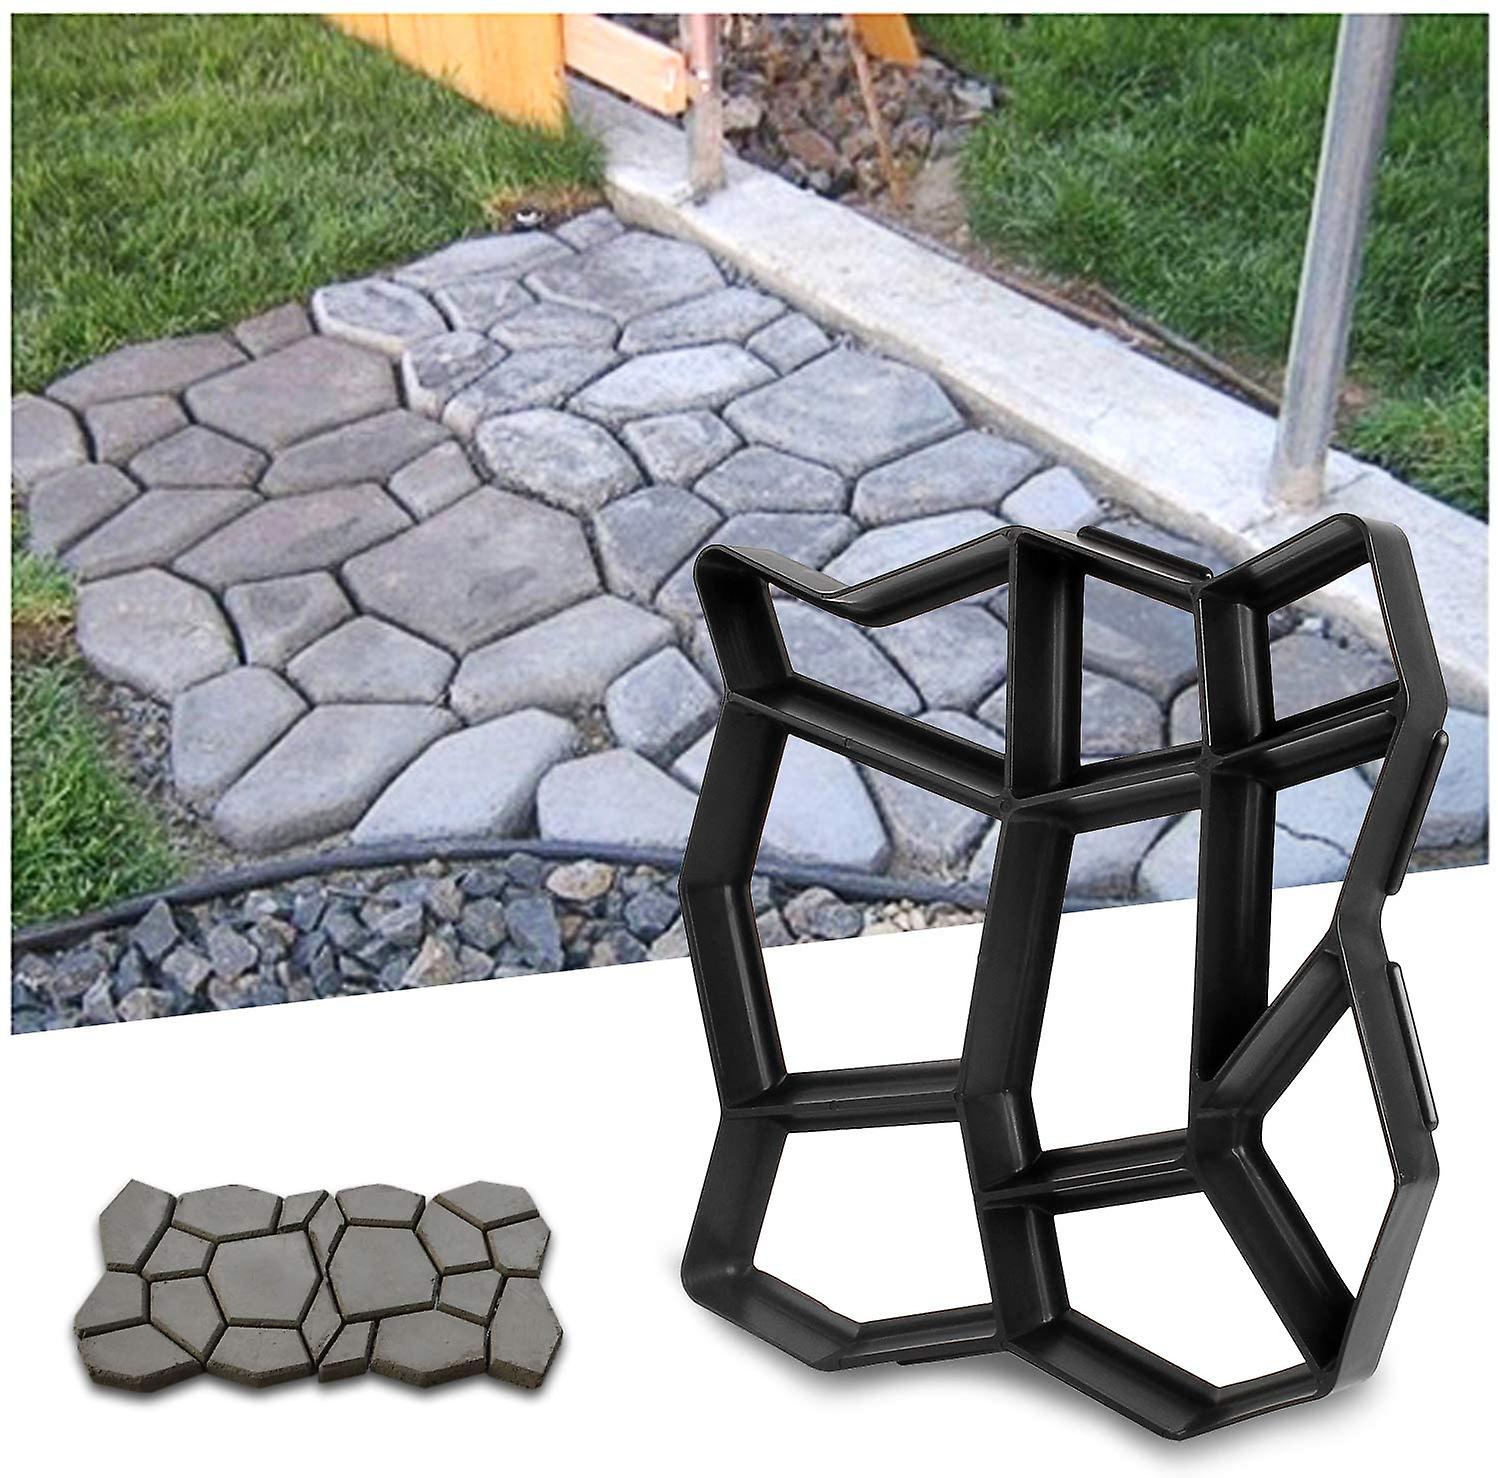 Reviews for Yard Elements Concrete Stepping Stone Molds Reusable DIY Paver  Pathway Maker for Gardens, Walkways, Outdoor Patios (Mold 6)